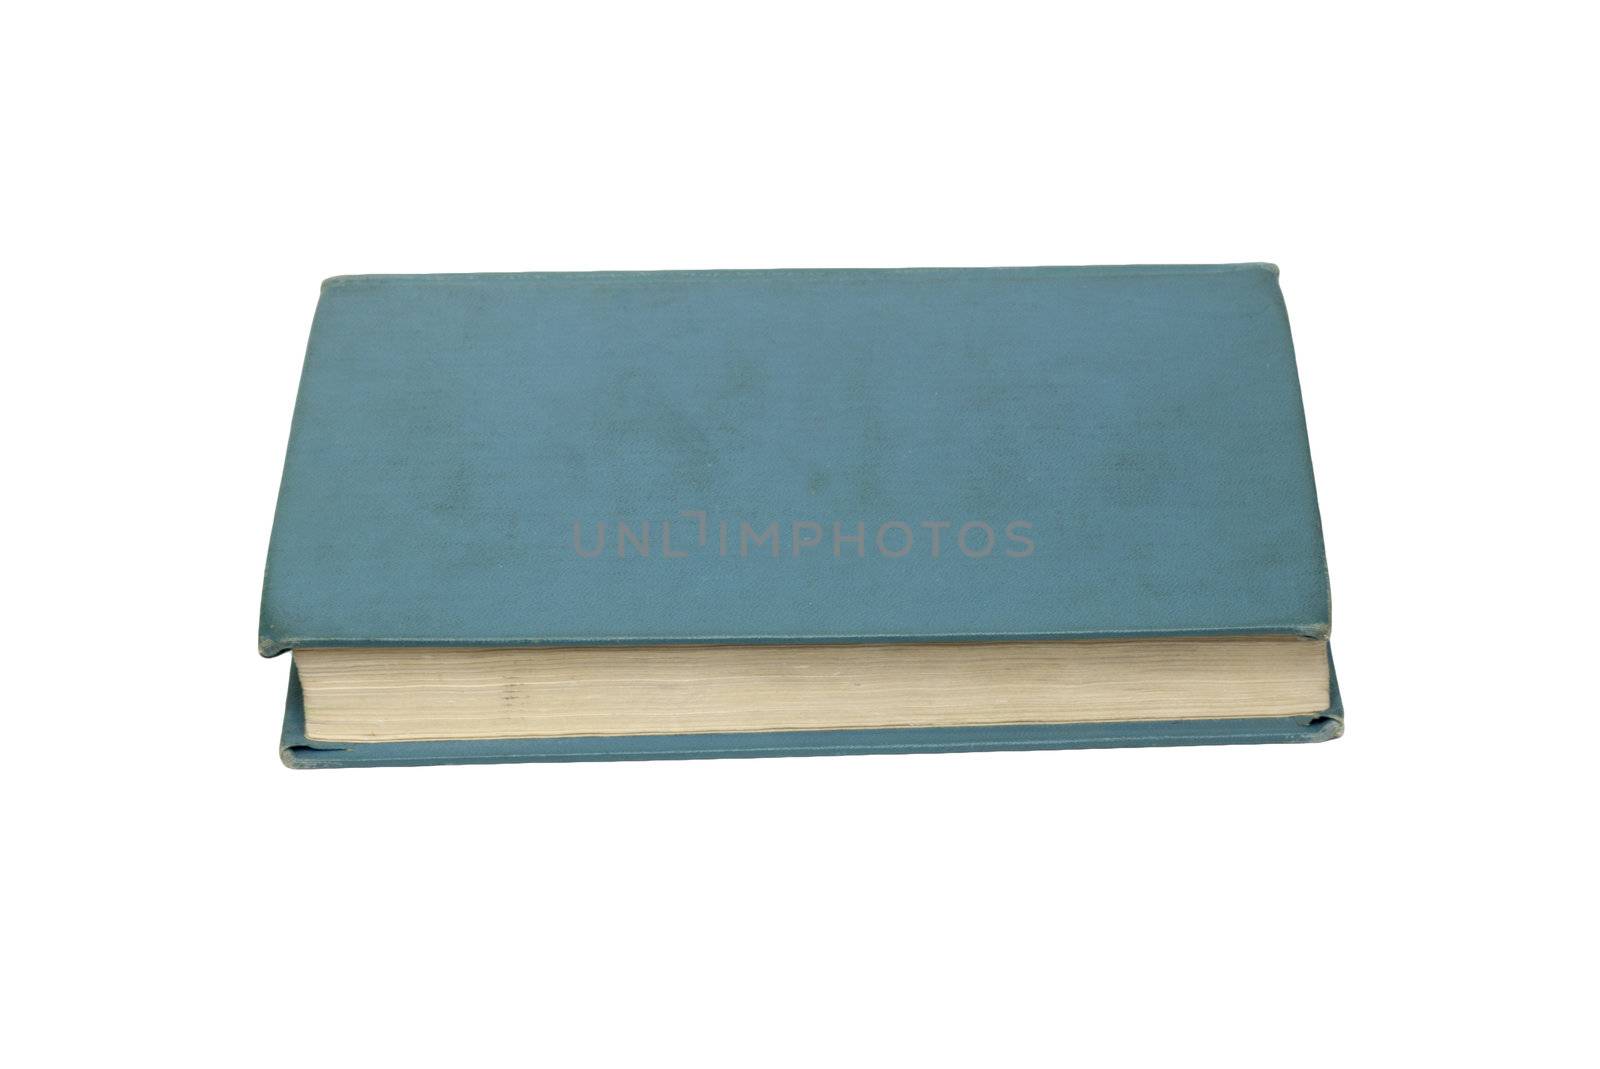 Blue book Isolated on white Background 